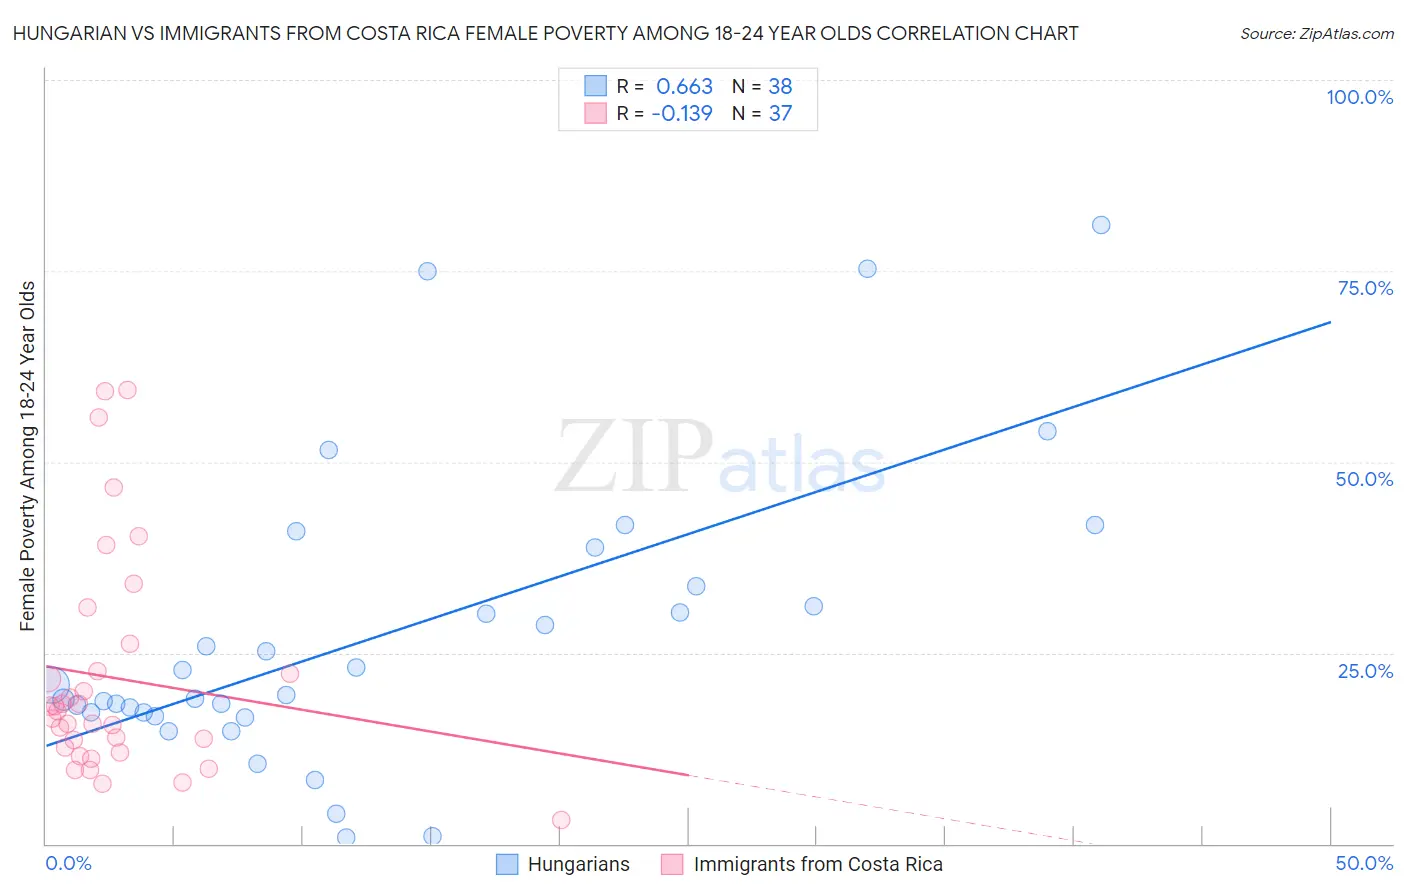 Hungarian vs Immigrants from Costa Rica Female Poverty Among 18-24 Year Olds